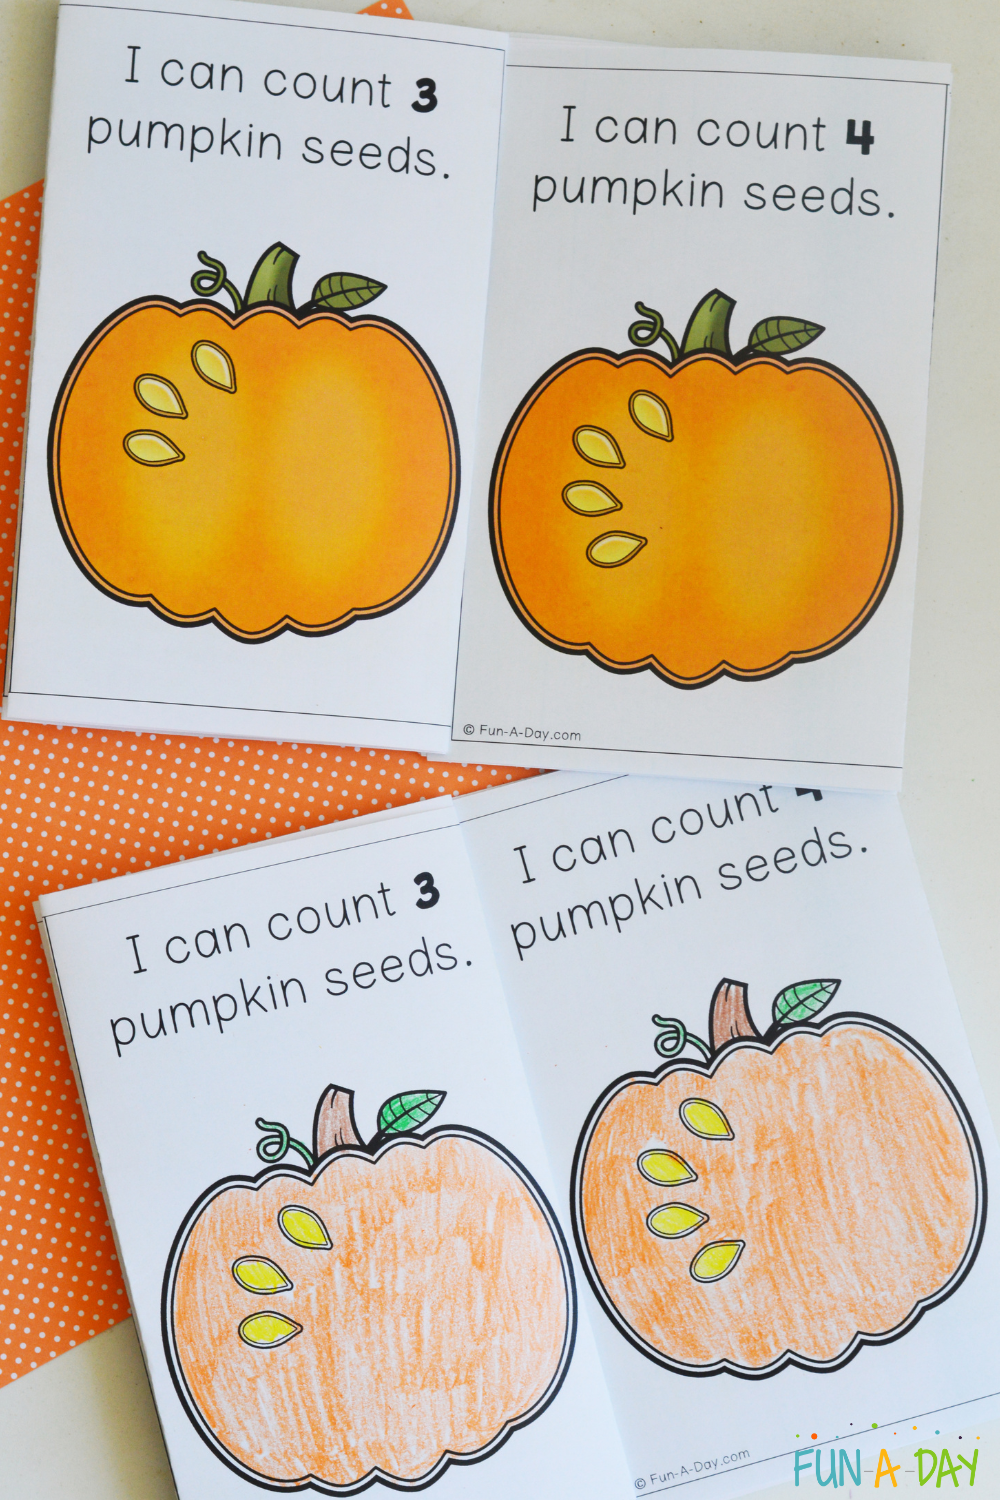 2 counting pumpkin seeds printable books - one color and one in black-and-white